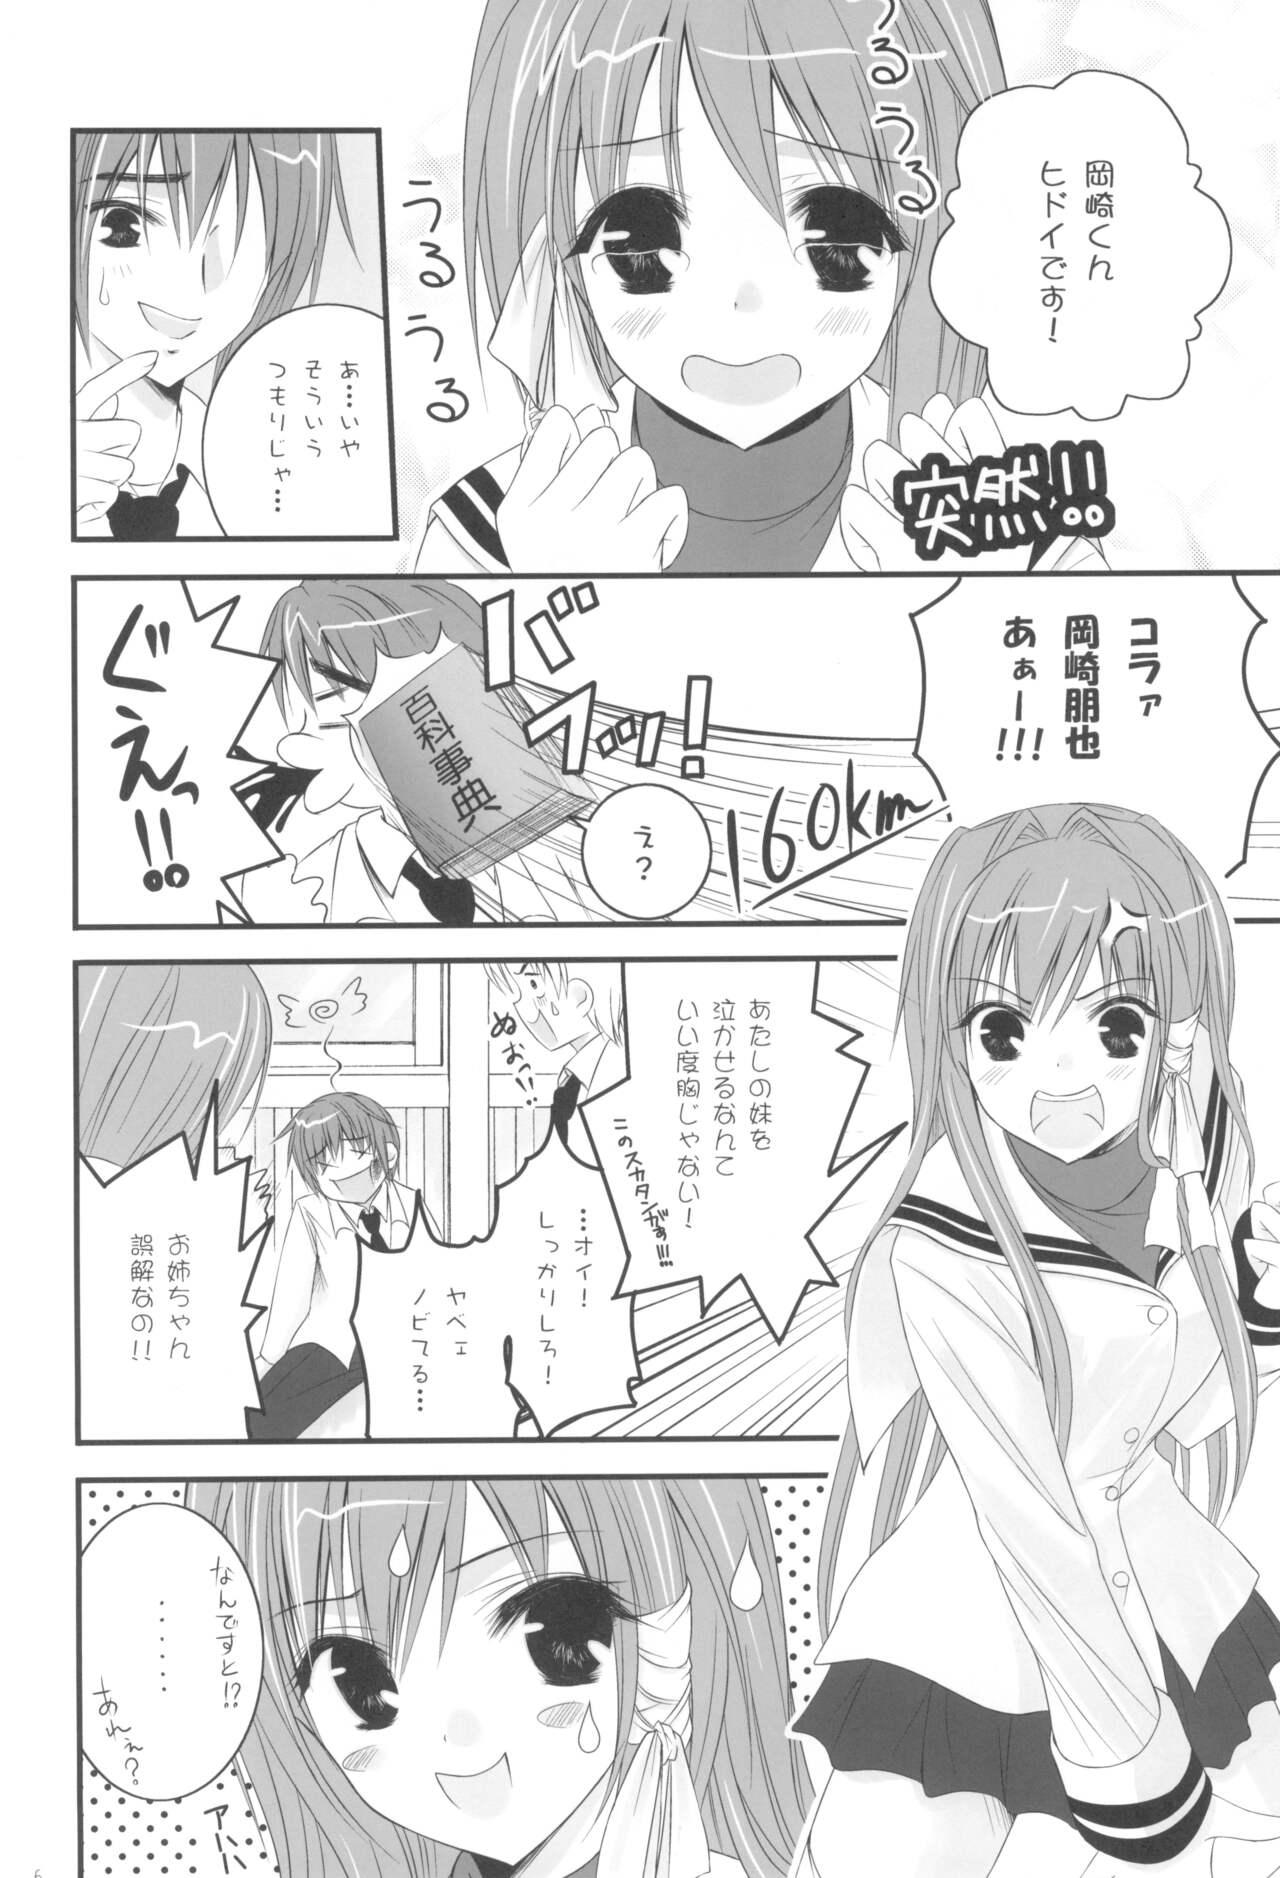 Trap Sweetest Coma Again - Clannad Xxx - Page 5